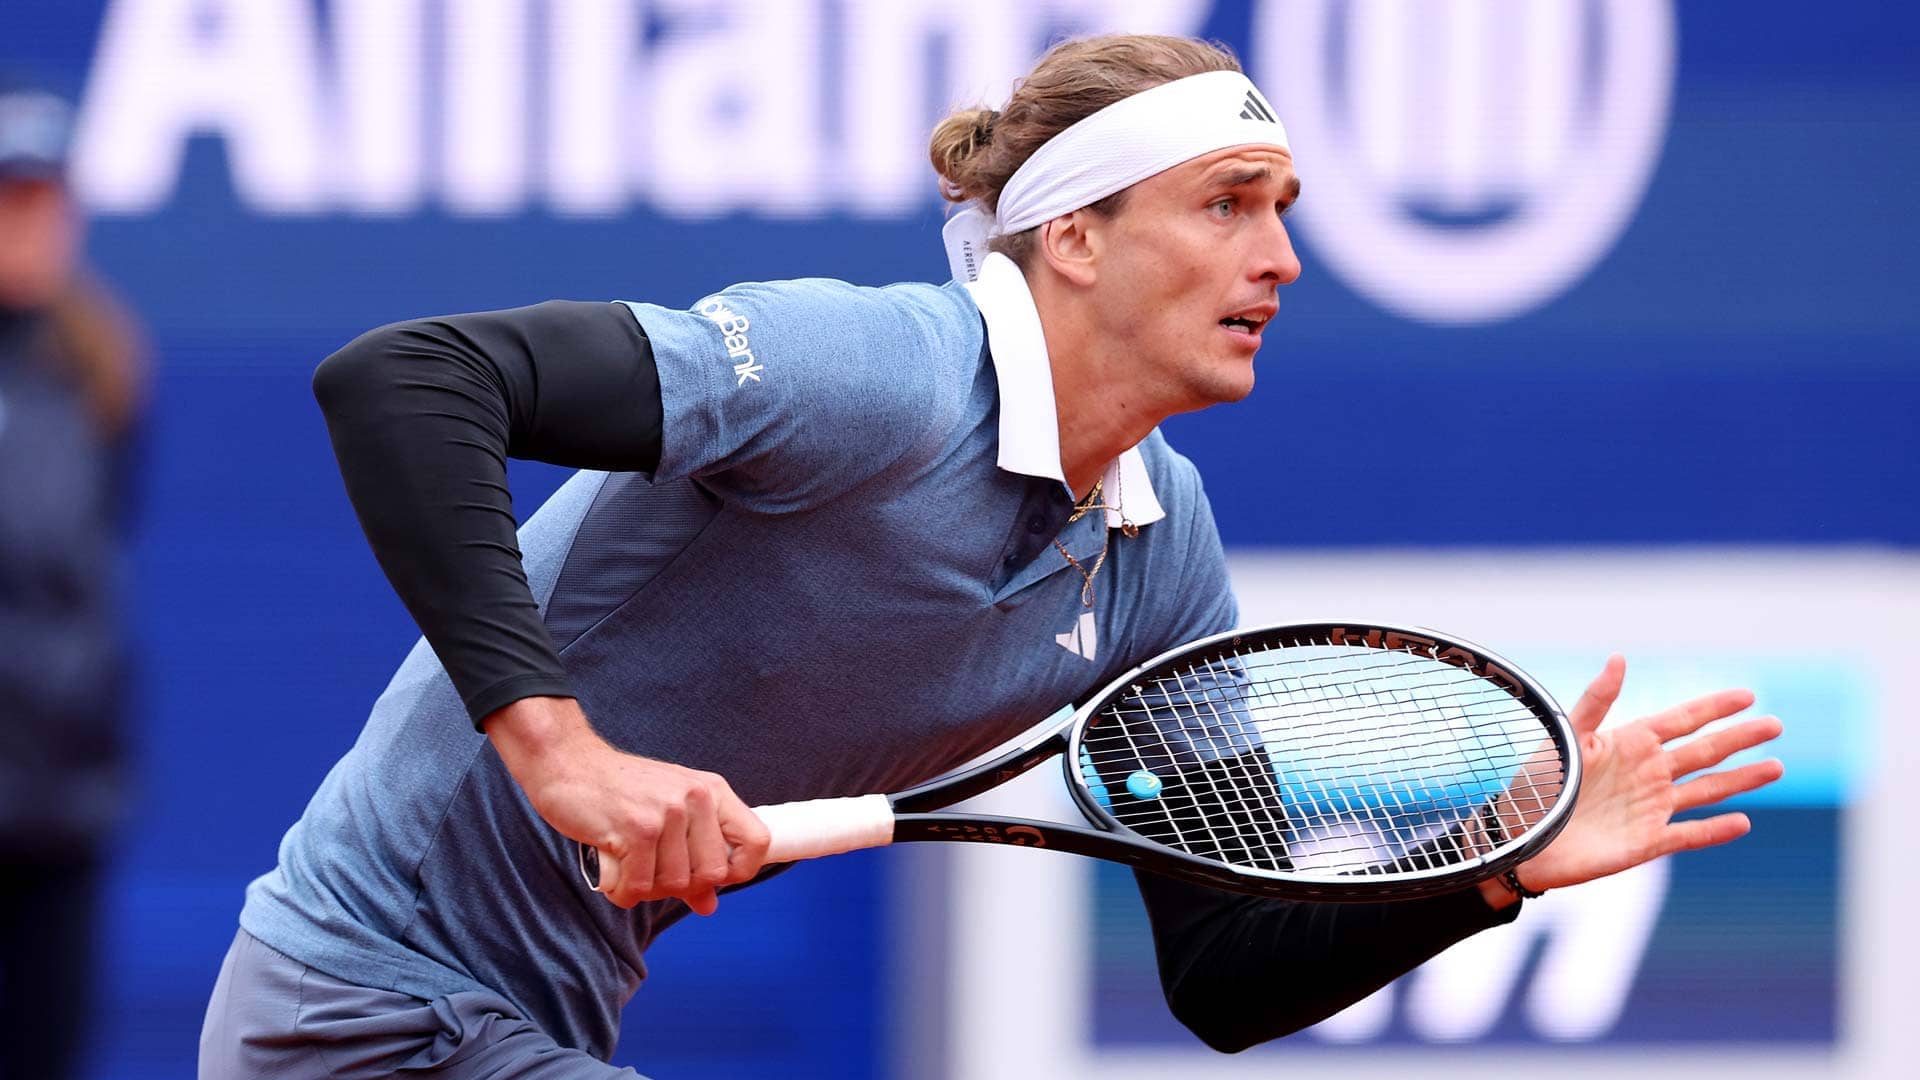 Zverev completes opening Munich win after hail delay